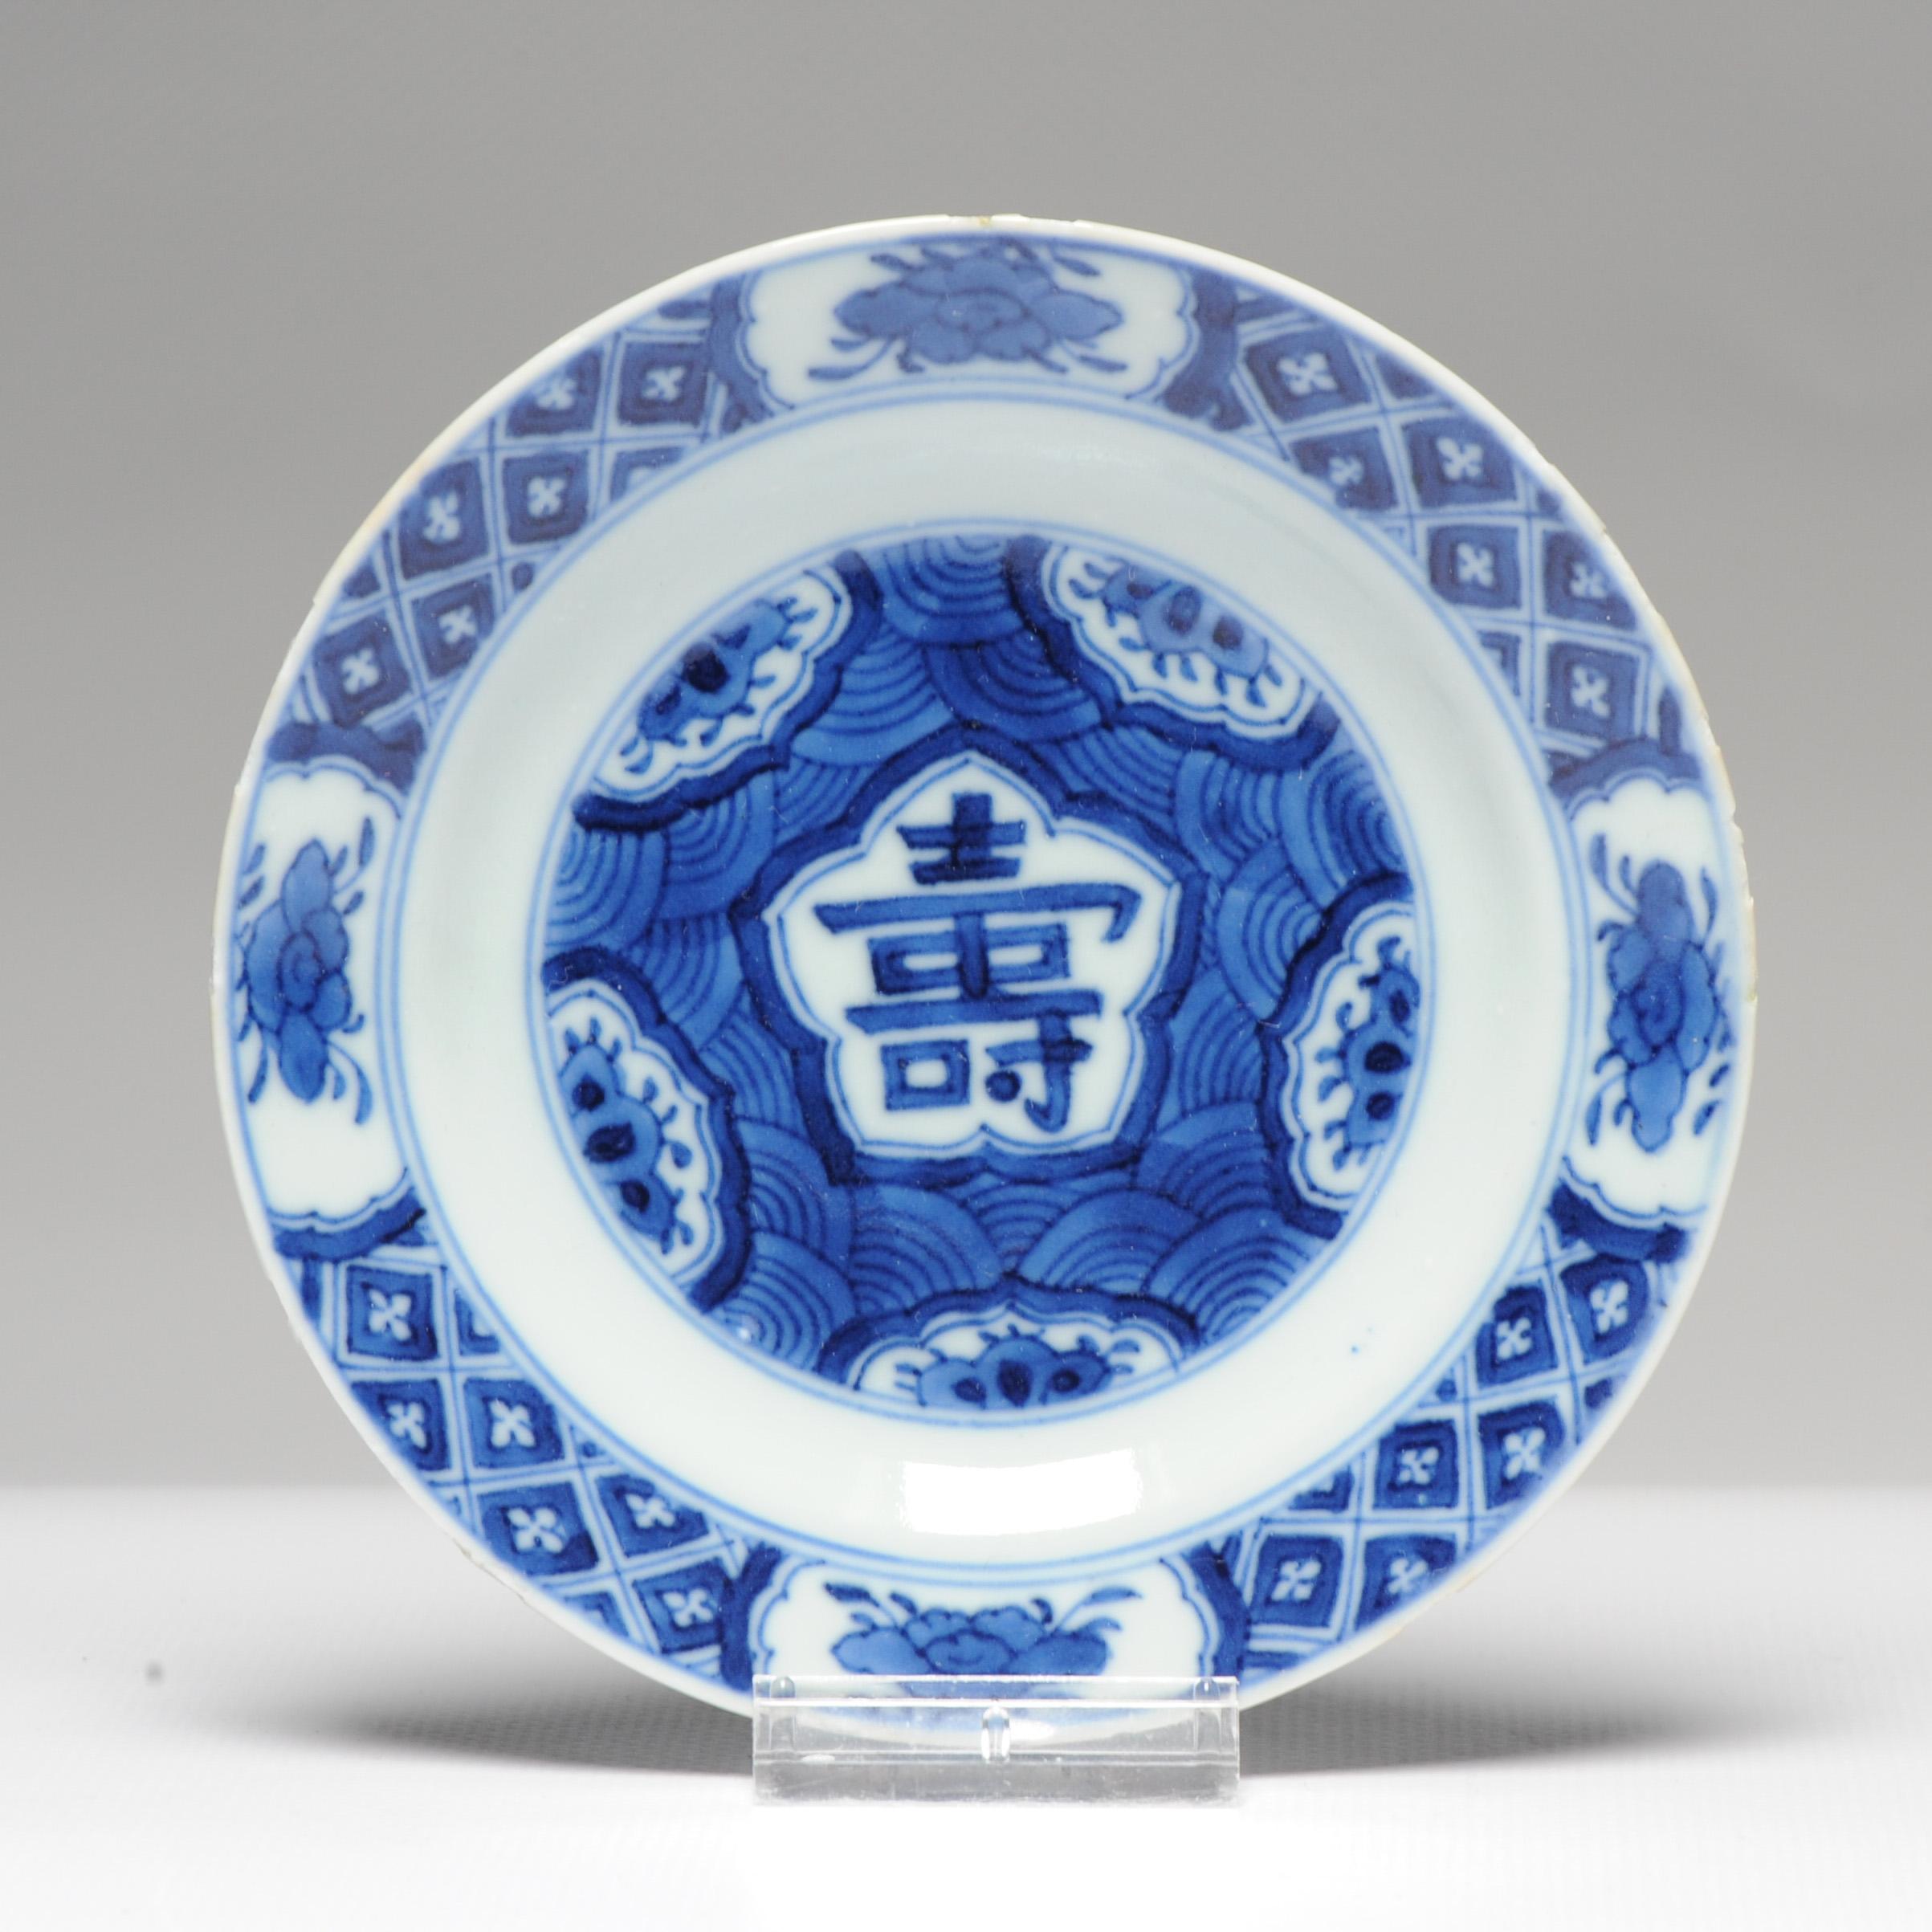 Description

Small plate on footring, wide, slightly upturned rim. Decorated in underglaze blue. In the centre a fish-scale pattern with five reserved, lobed half-
panels with a flower, in the centre a lobed panel with the character shou (long